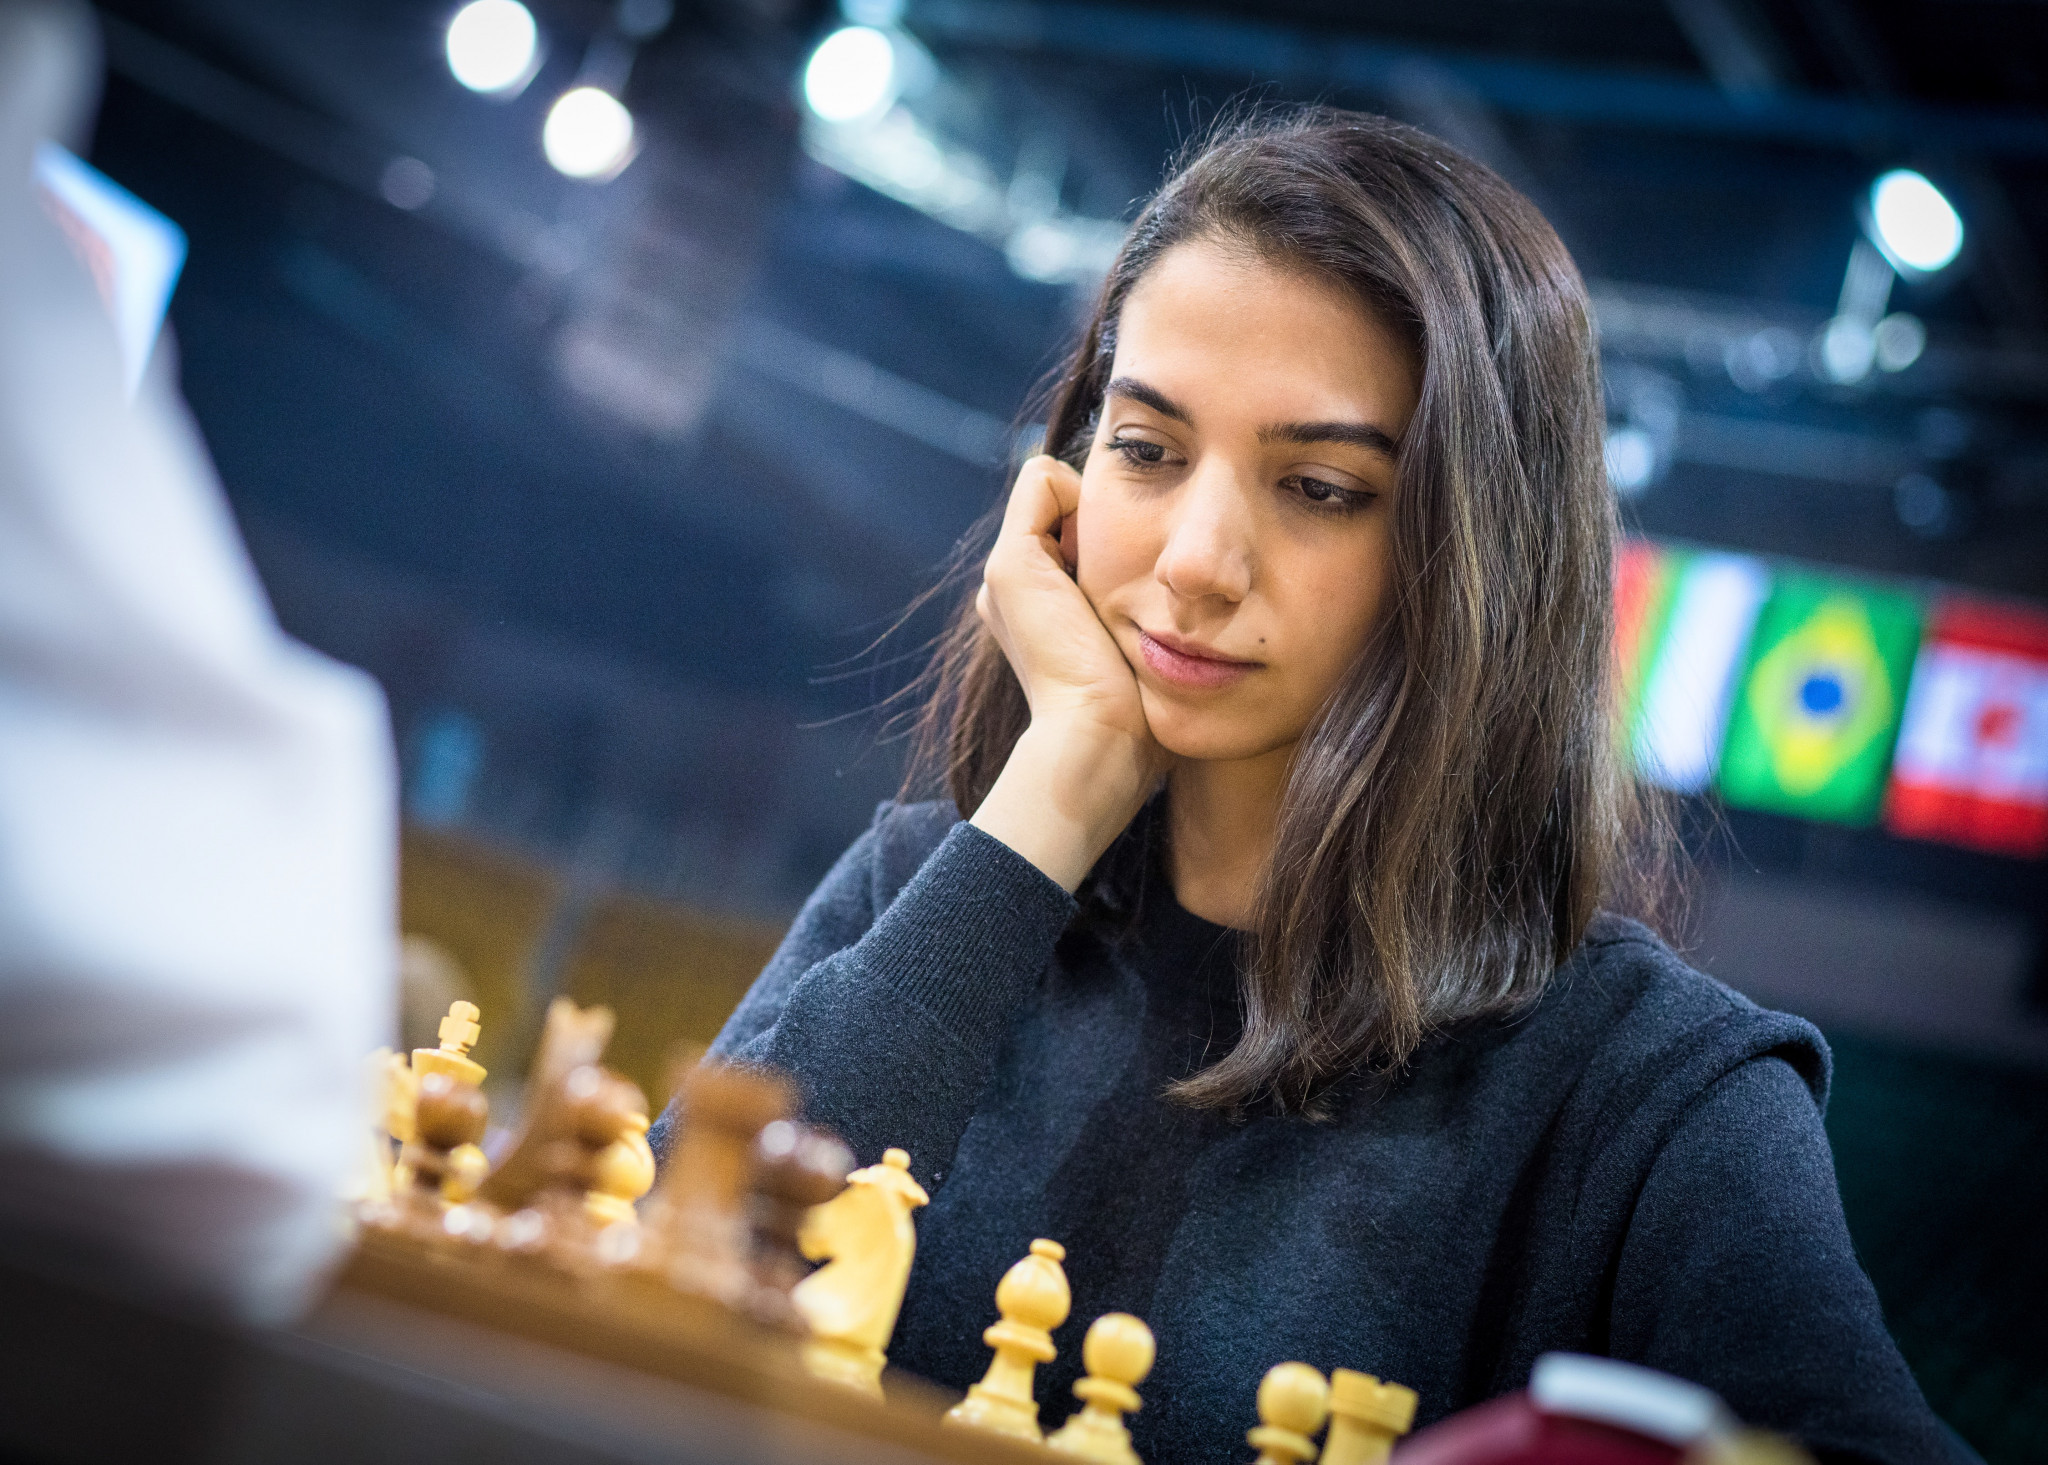 Sara Khadem was pictured not wearing a hijab at the FIDE World Rapid and Blitz Chess Championships ©Lennart Ootes/FIDE